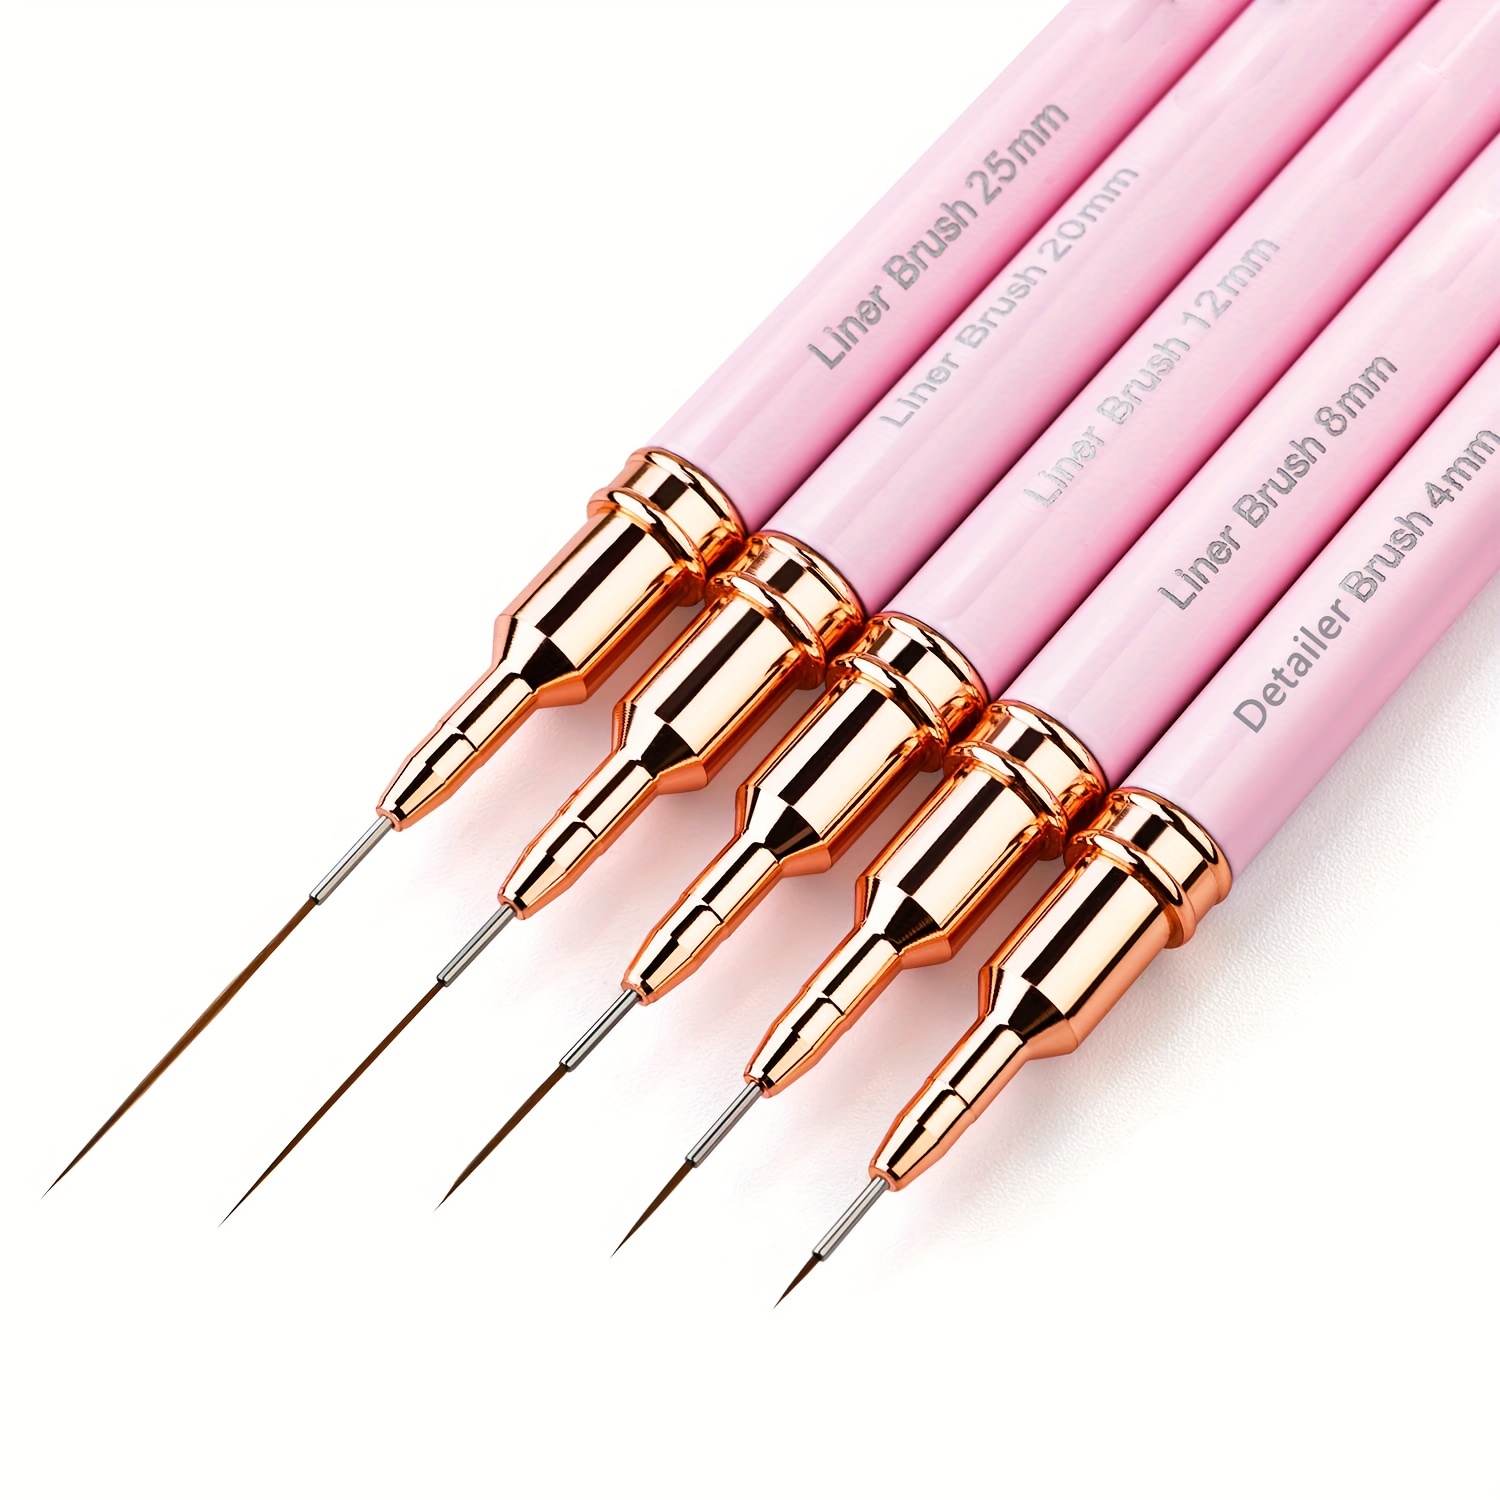 

5pcs Fine Nail Art Brush Set Pens For Long Nails - Perfect For Gel Polish Painting And Manicure - Includes 5 Sizes (4/8/12/20/25mm) - Details Nail Art Designs Free Of Acetone